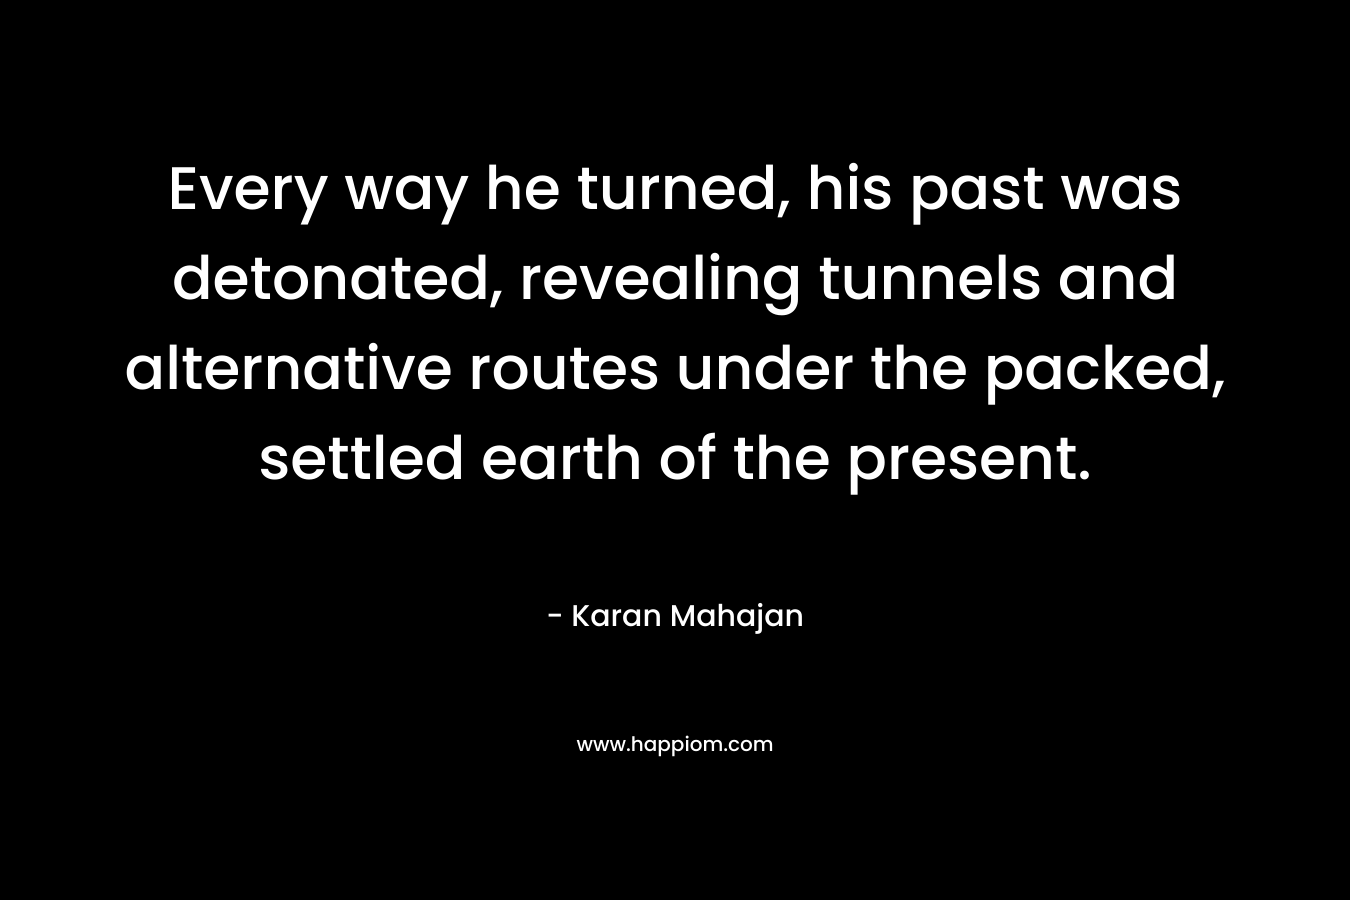 Every way he turned, his past was detonated, revealing tunnels and alternative routes under the packed, settled earth of the present. – Karan Mahajan